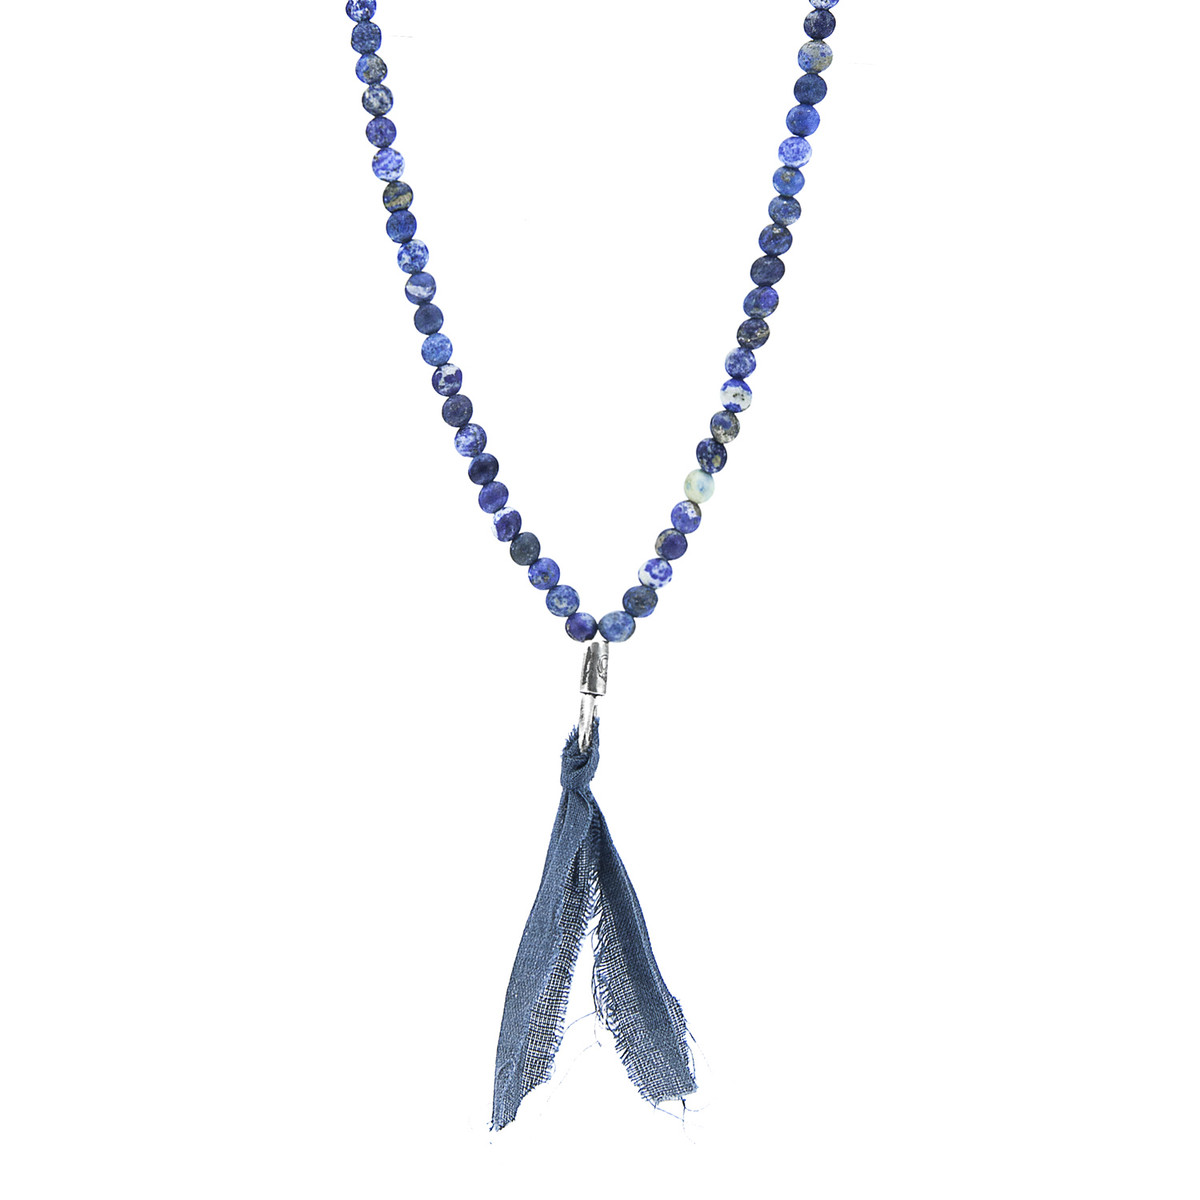 Anchor & Crew Blue Sodalite Luke Silver, Stone and Cotton Voile SKINNY Necklace x Wrap Bracelet